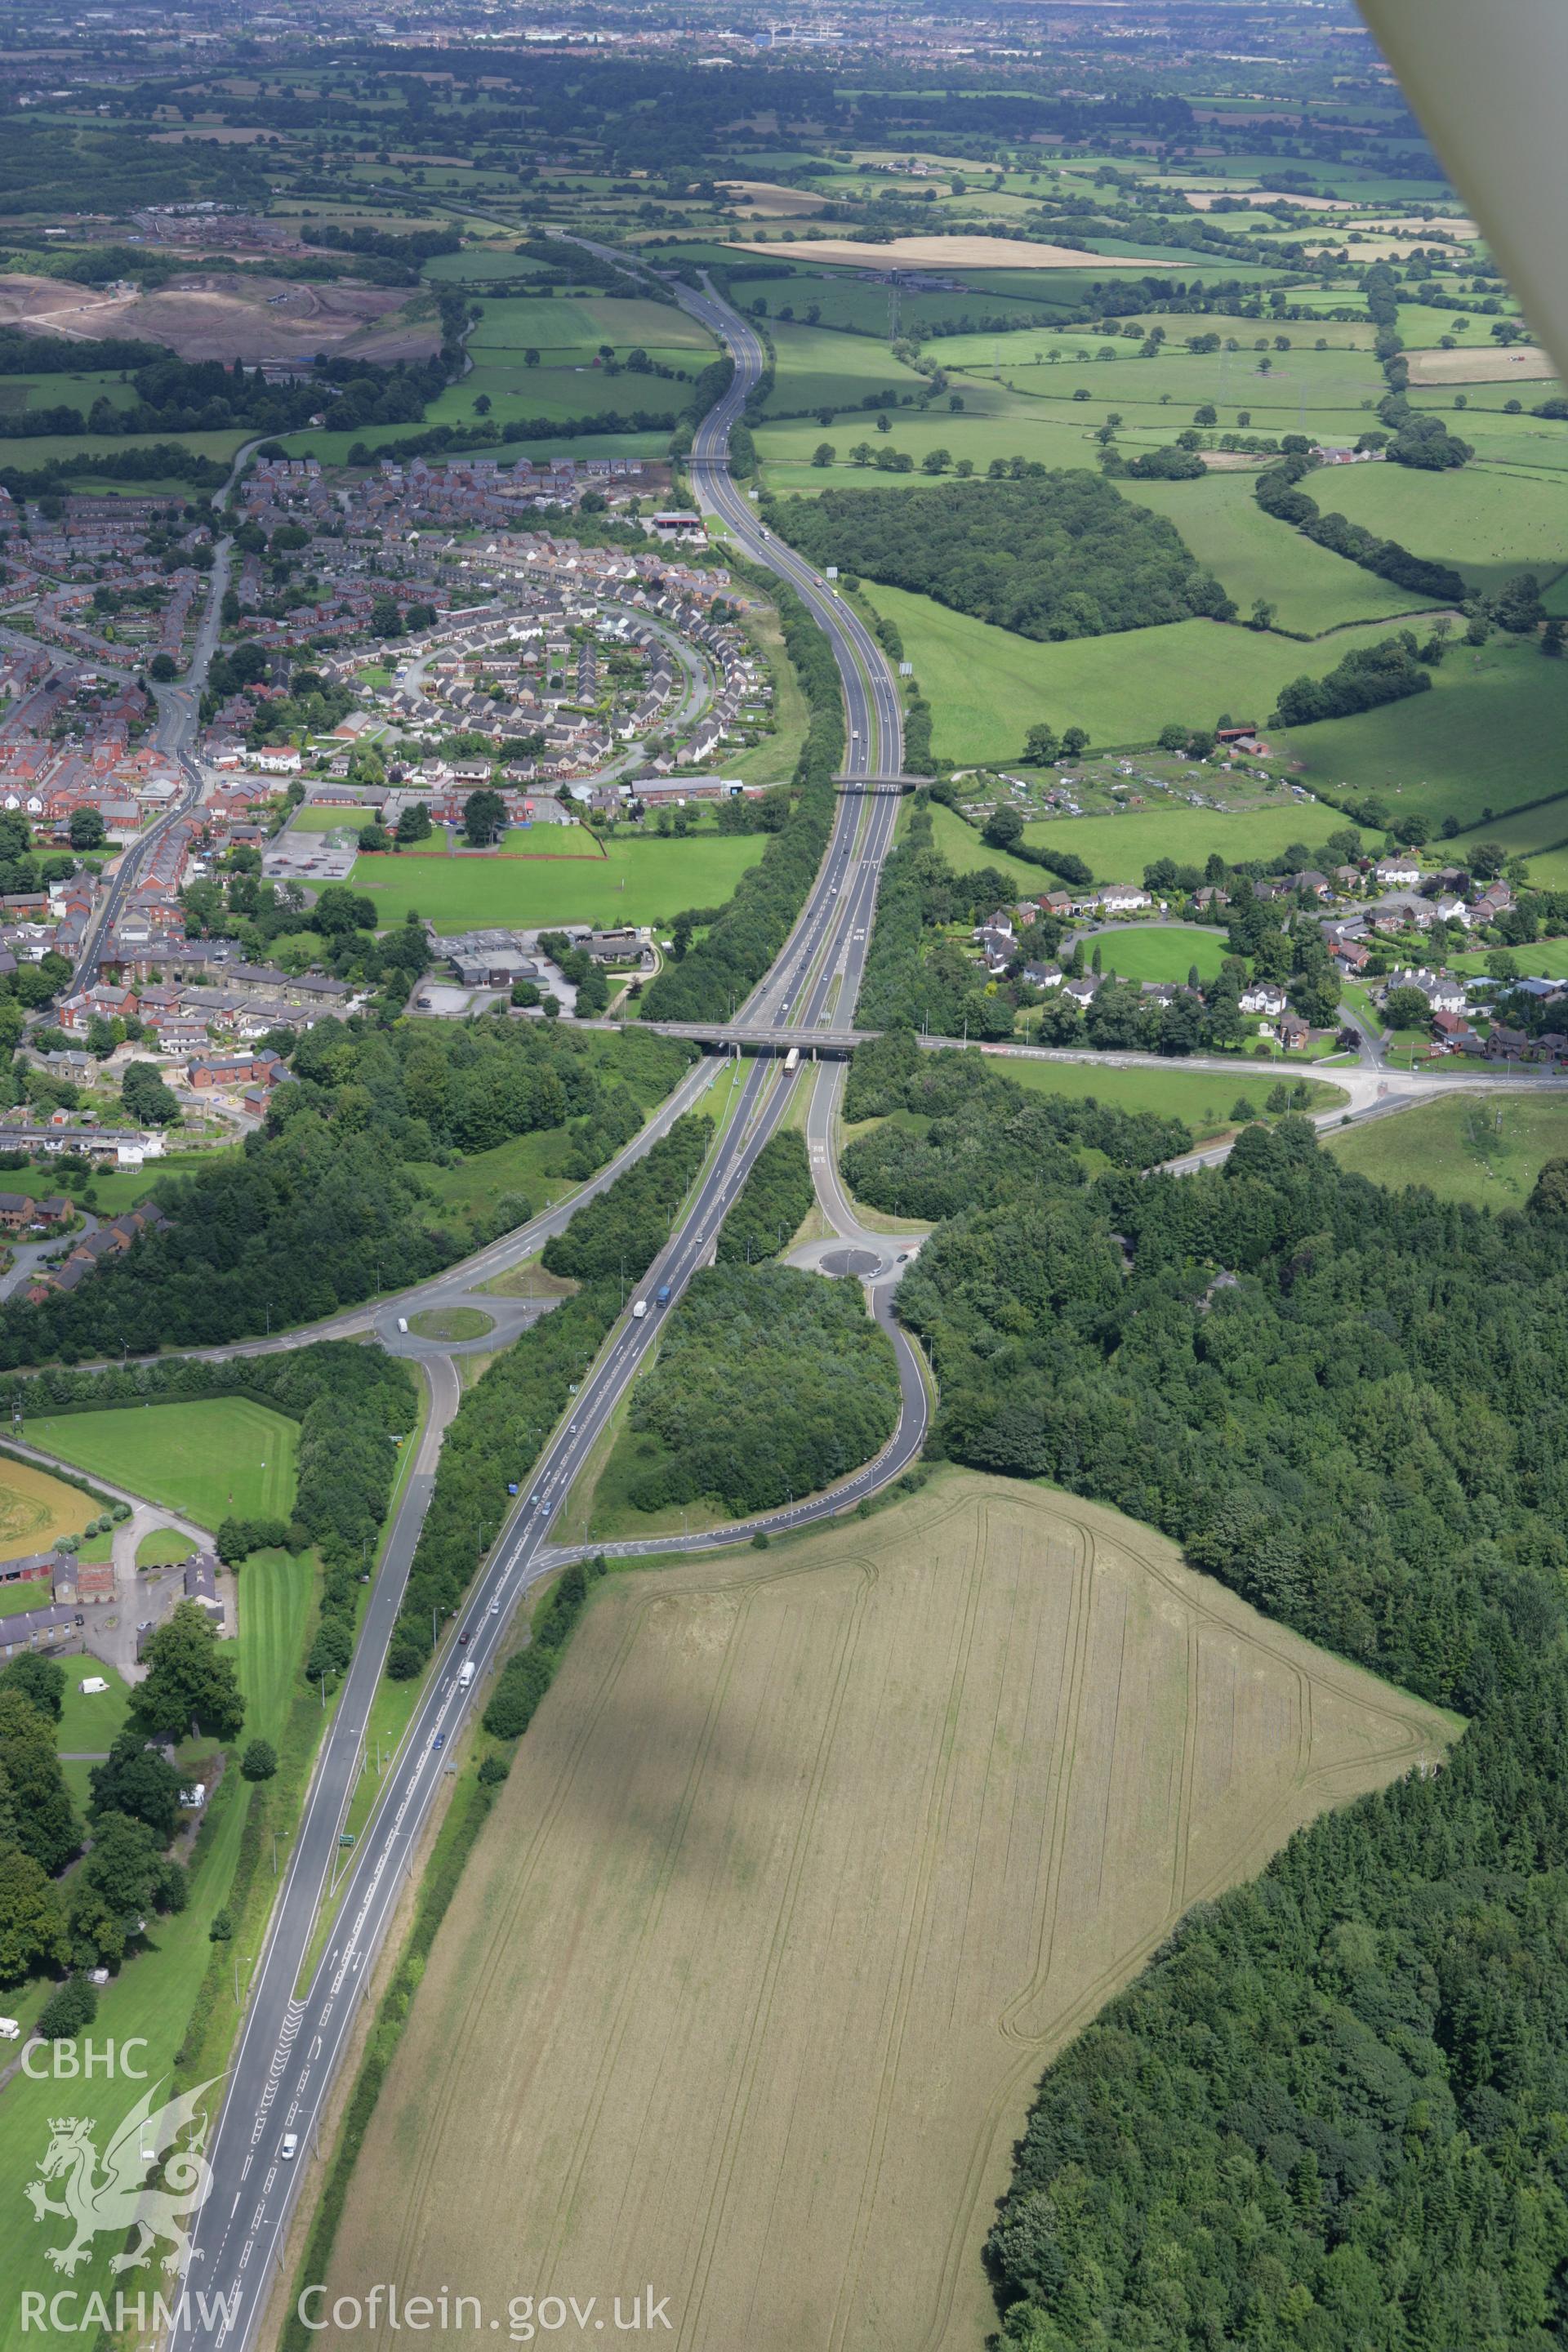 RCAHMW colour oblique aerial photograph of Ruabon from the south west. Taken on 24 July 2007 by Toby Driver